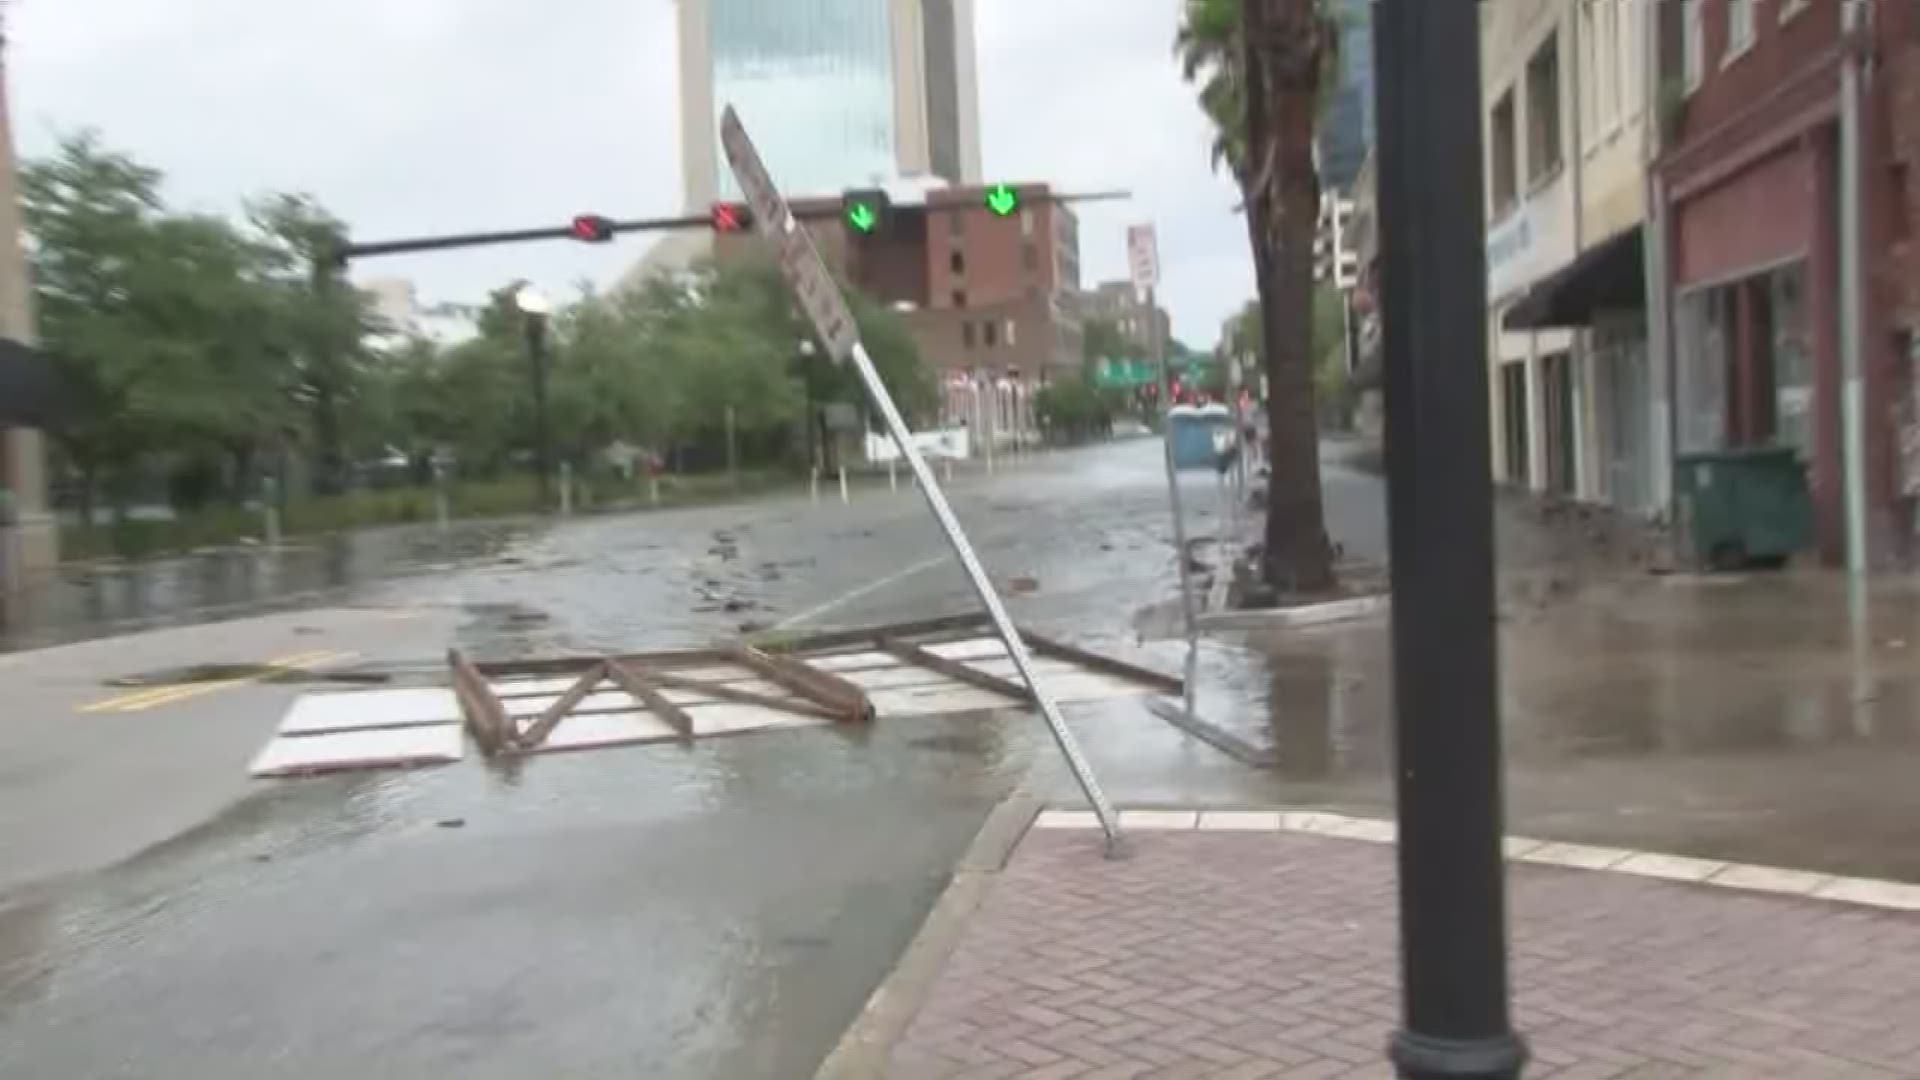 The conditions rapidly deteriorated in downtown Jacksonville as Irma made its way through the area. (9/11/17 10:15 a.m.)